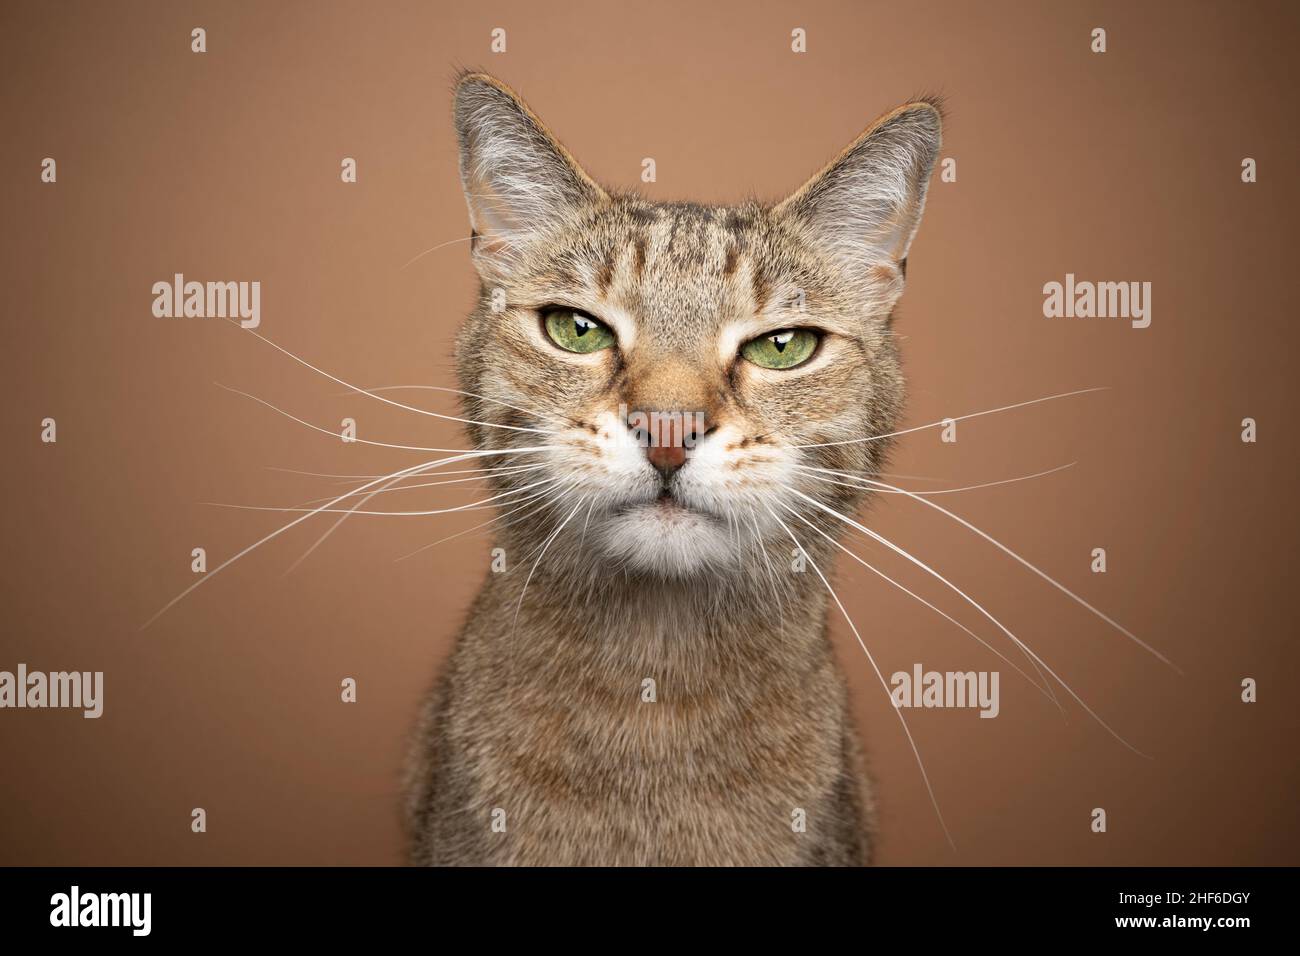 light brown cat with green eyes and long white whiskers looking at camera portrait on brown background Stock Photo